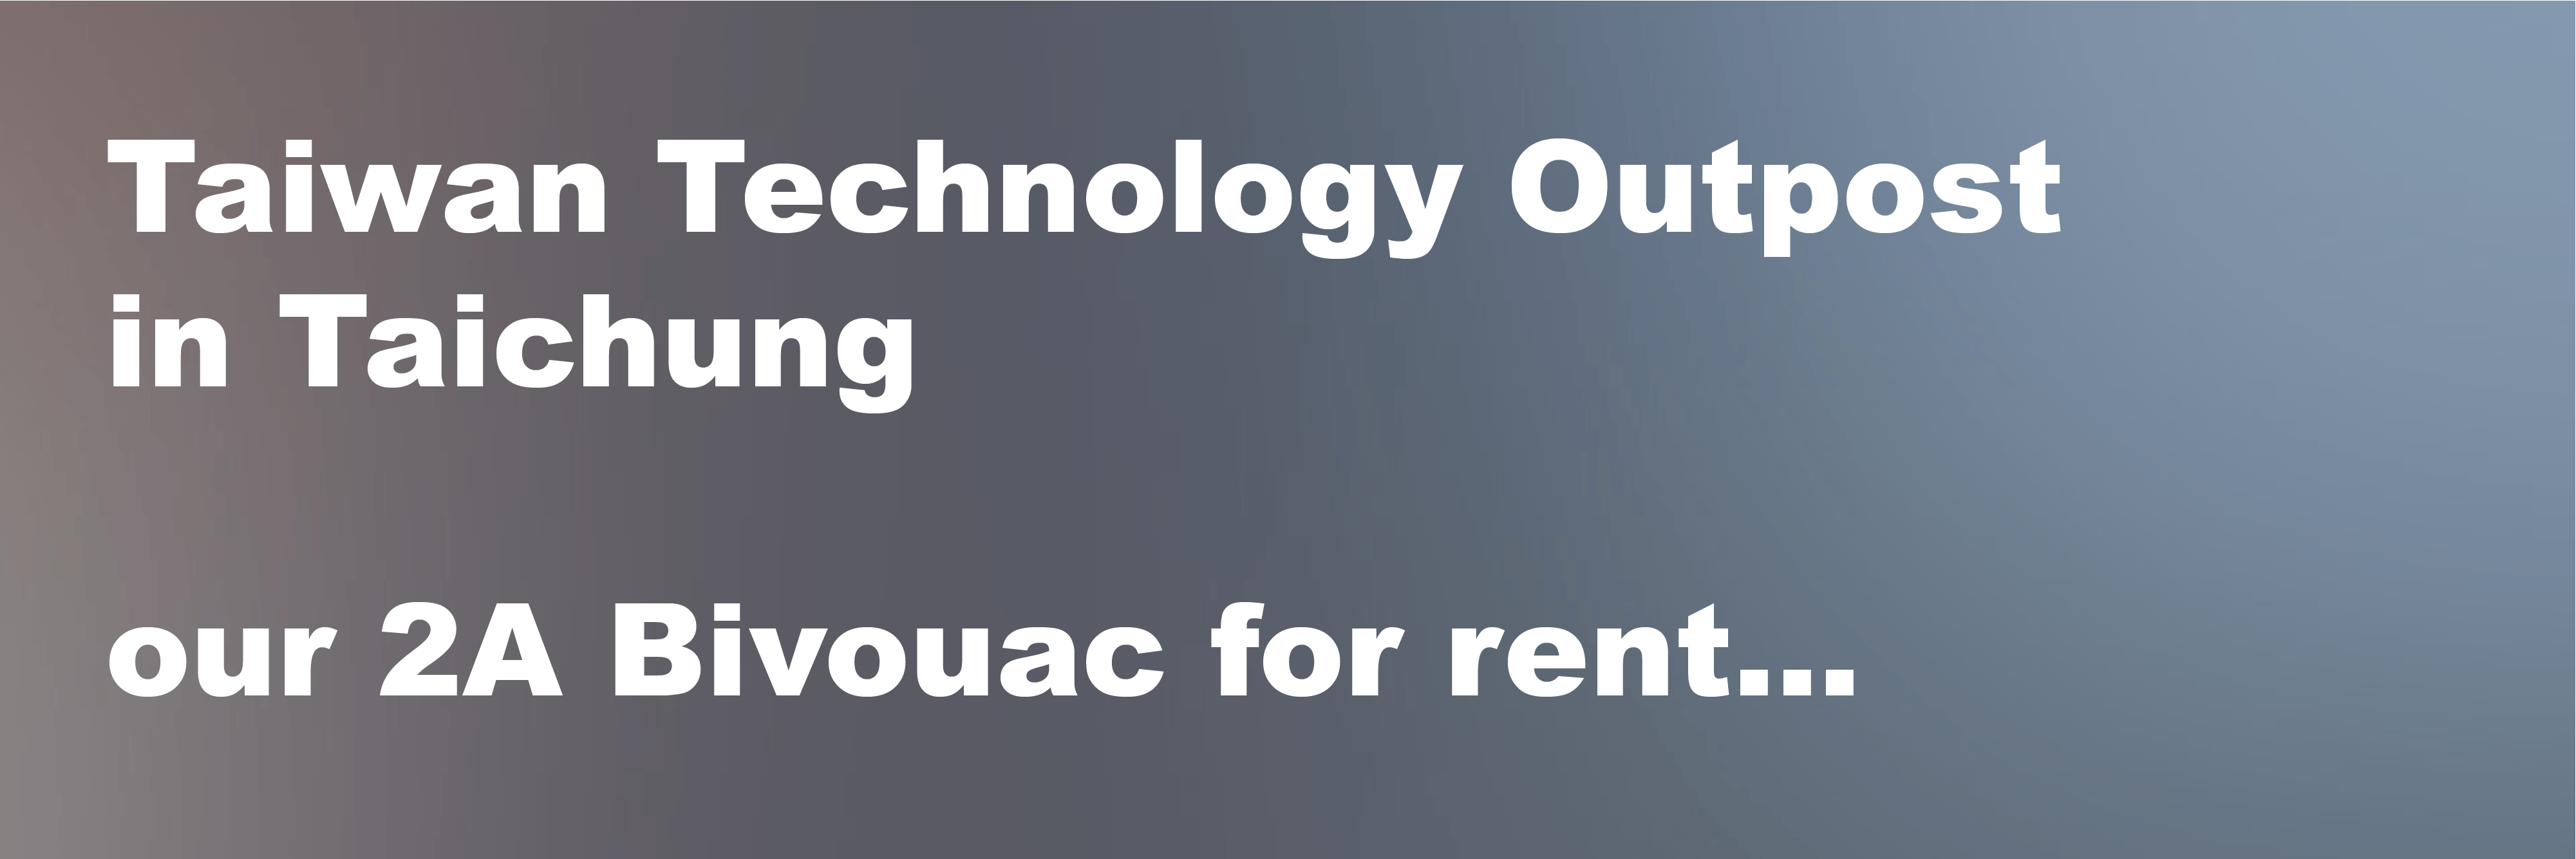 Taiwan Technology Outpost In Taichung Office Rental Bivouac